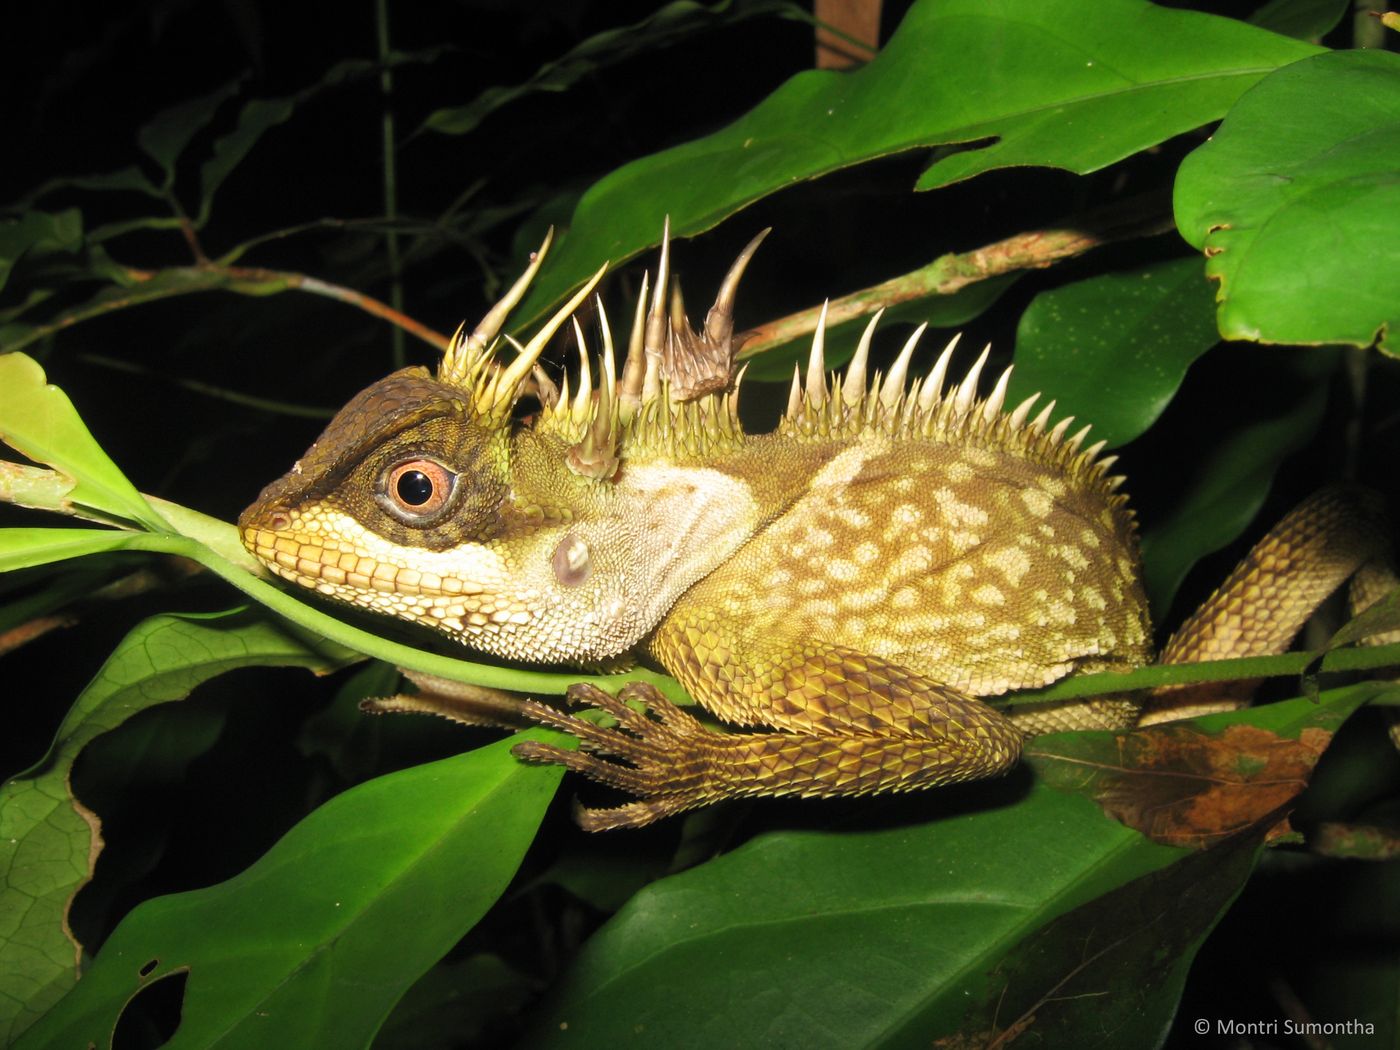 The Phuket Horned Tree Agamid has a weird assortment of horns on its body.